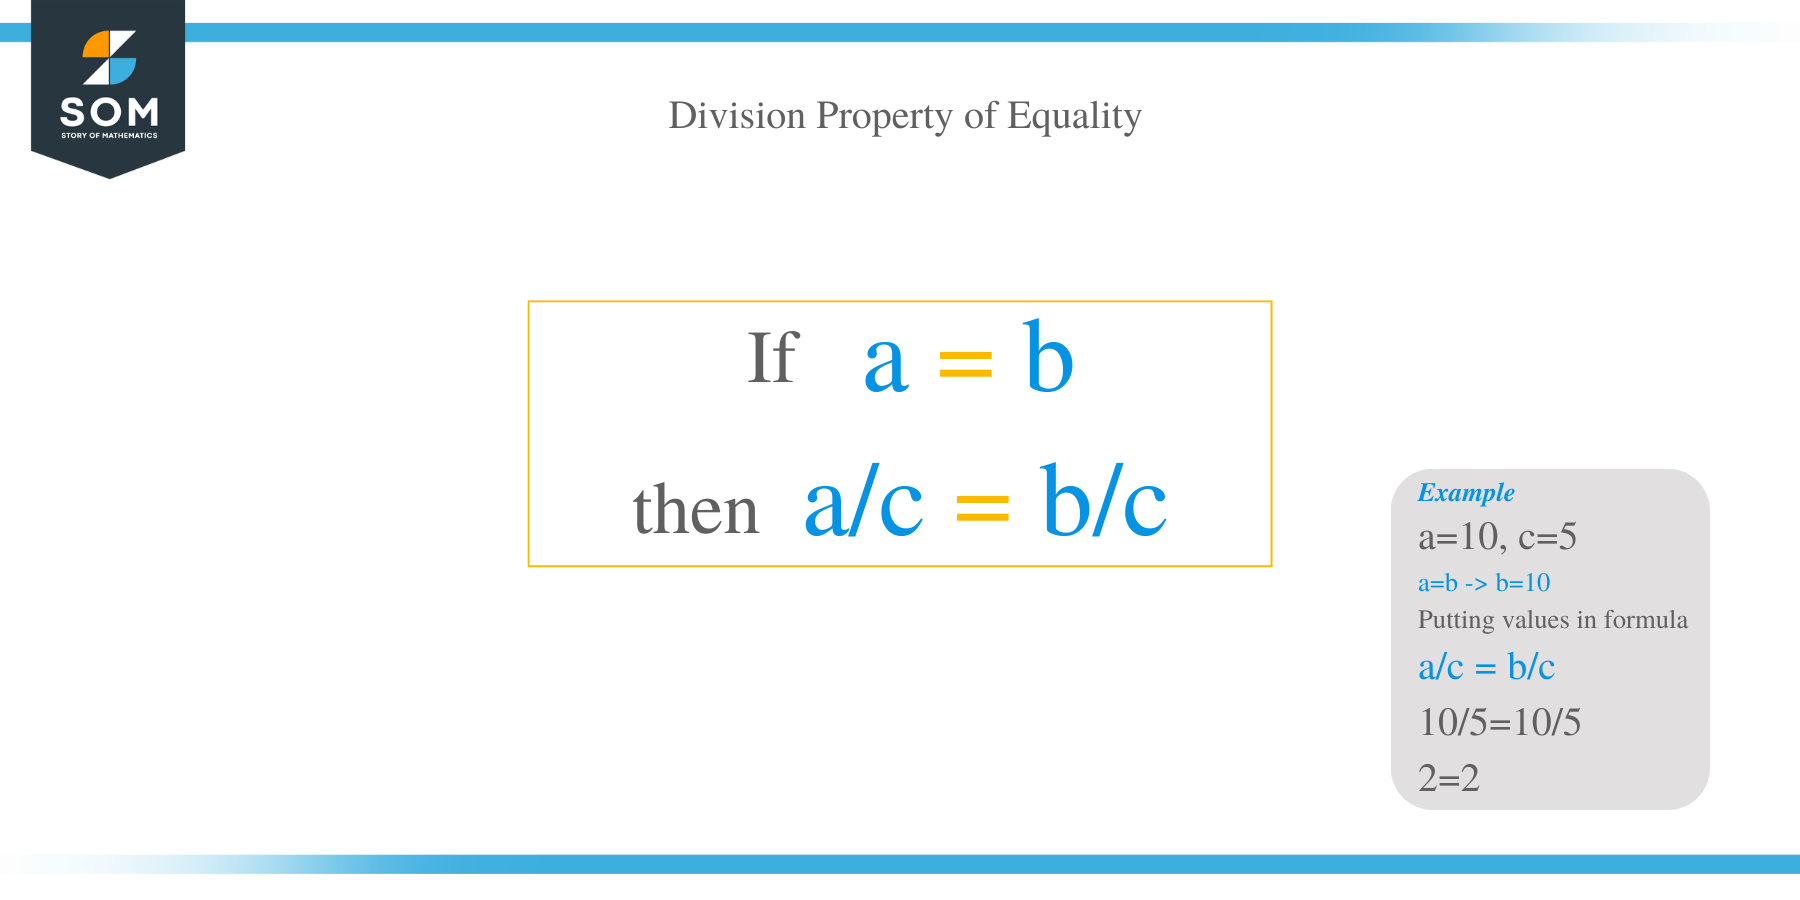 What Is Division Property of Equality?